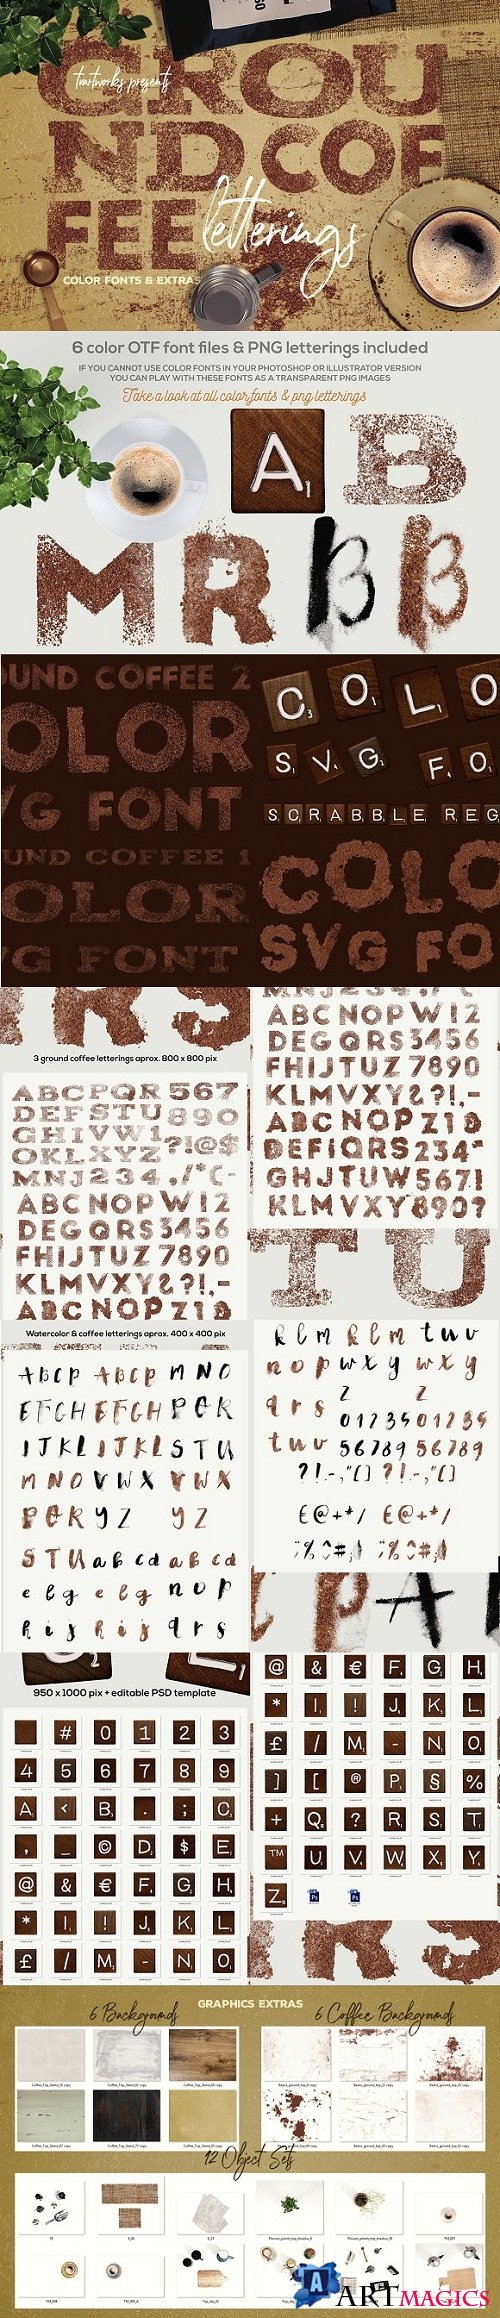 Ground Coffee PNG Letterings - 3505121